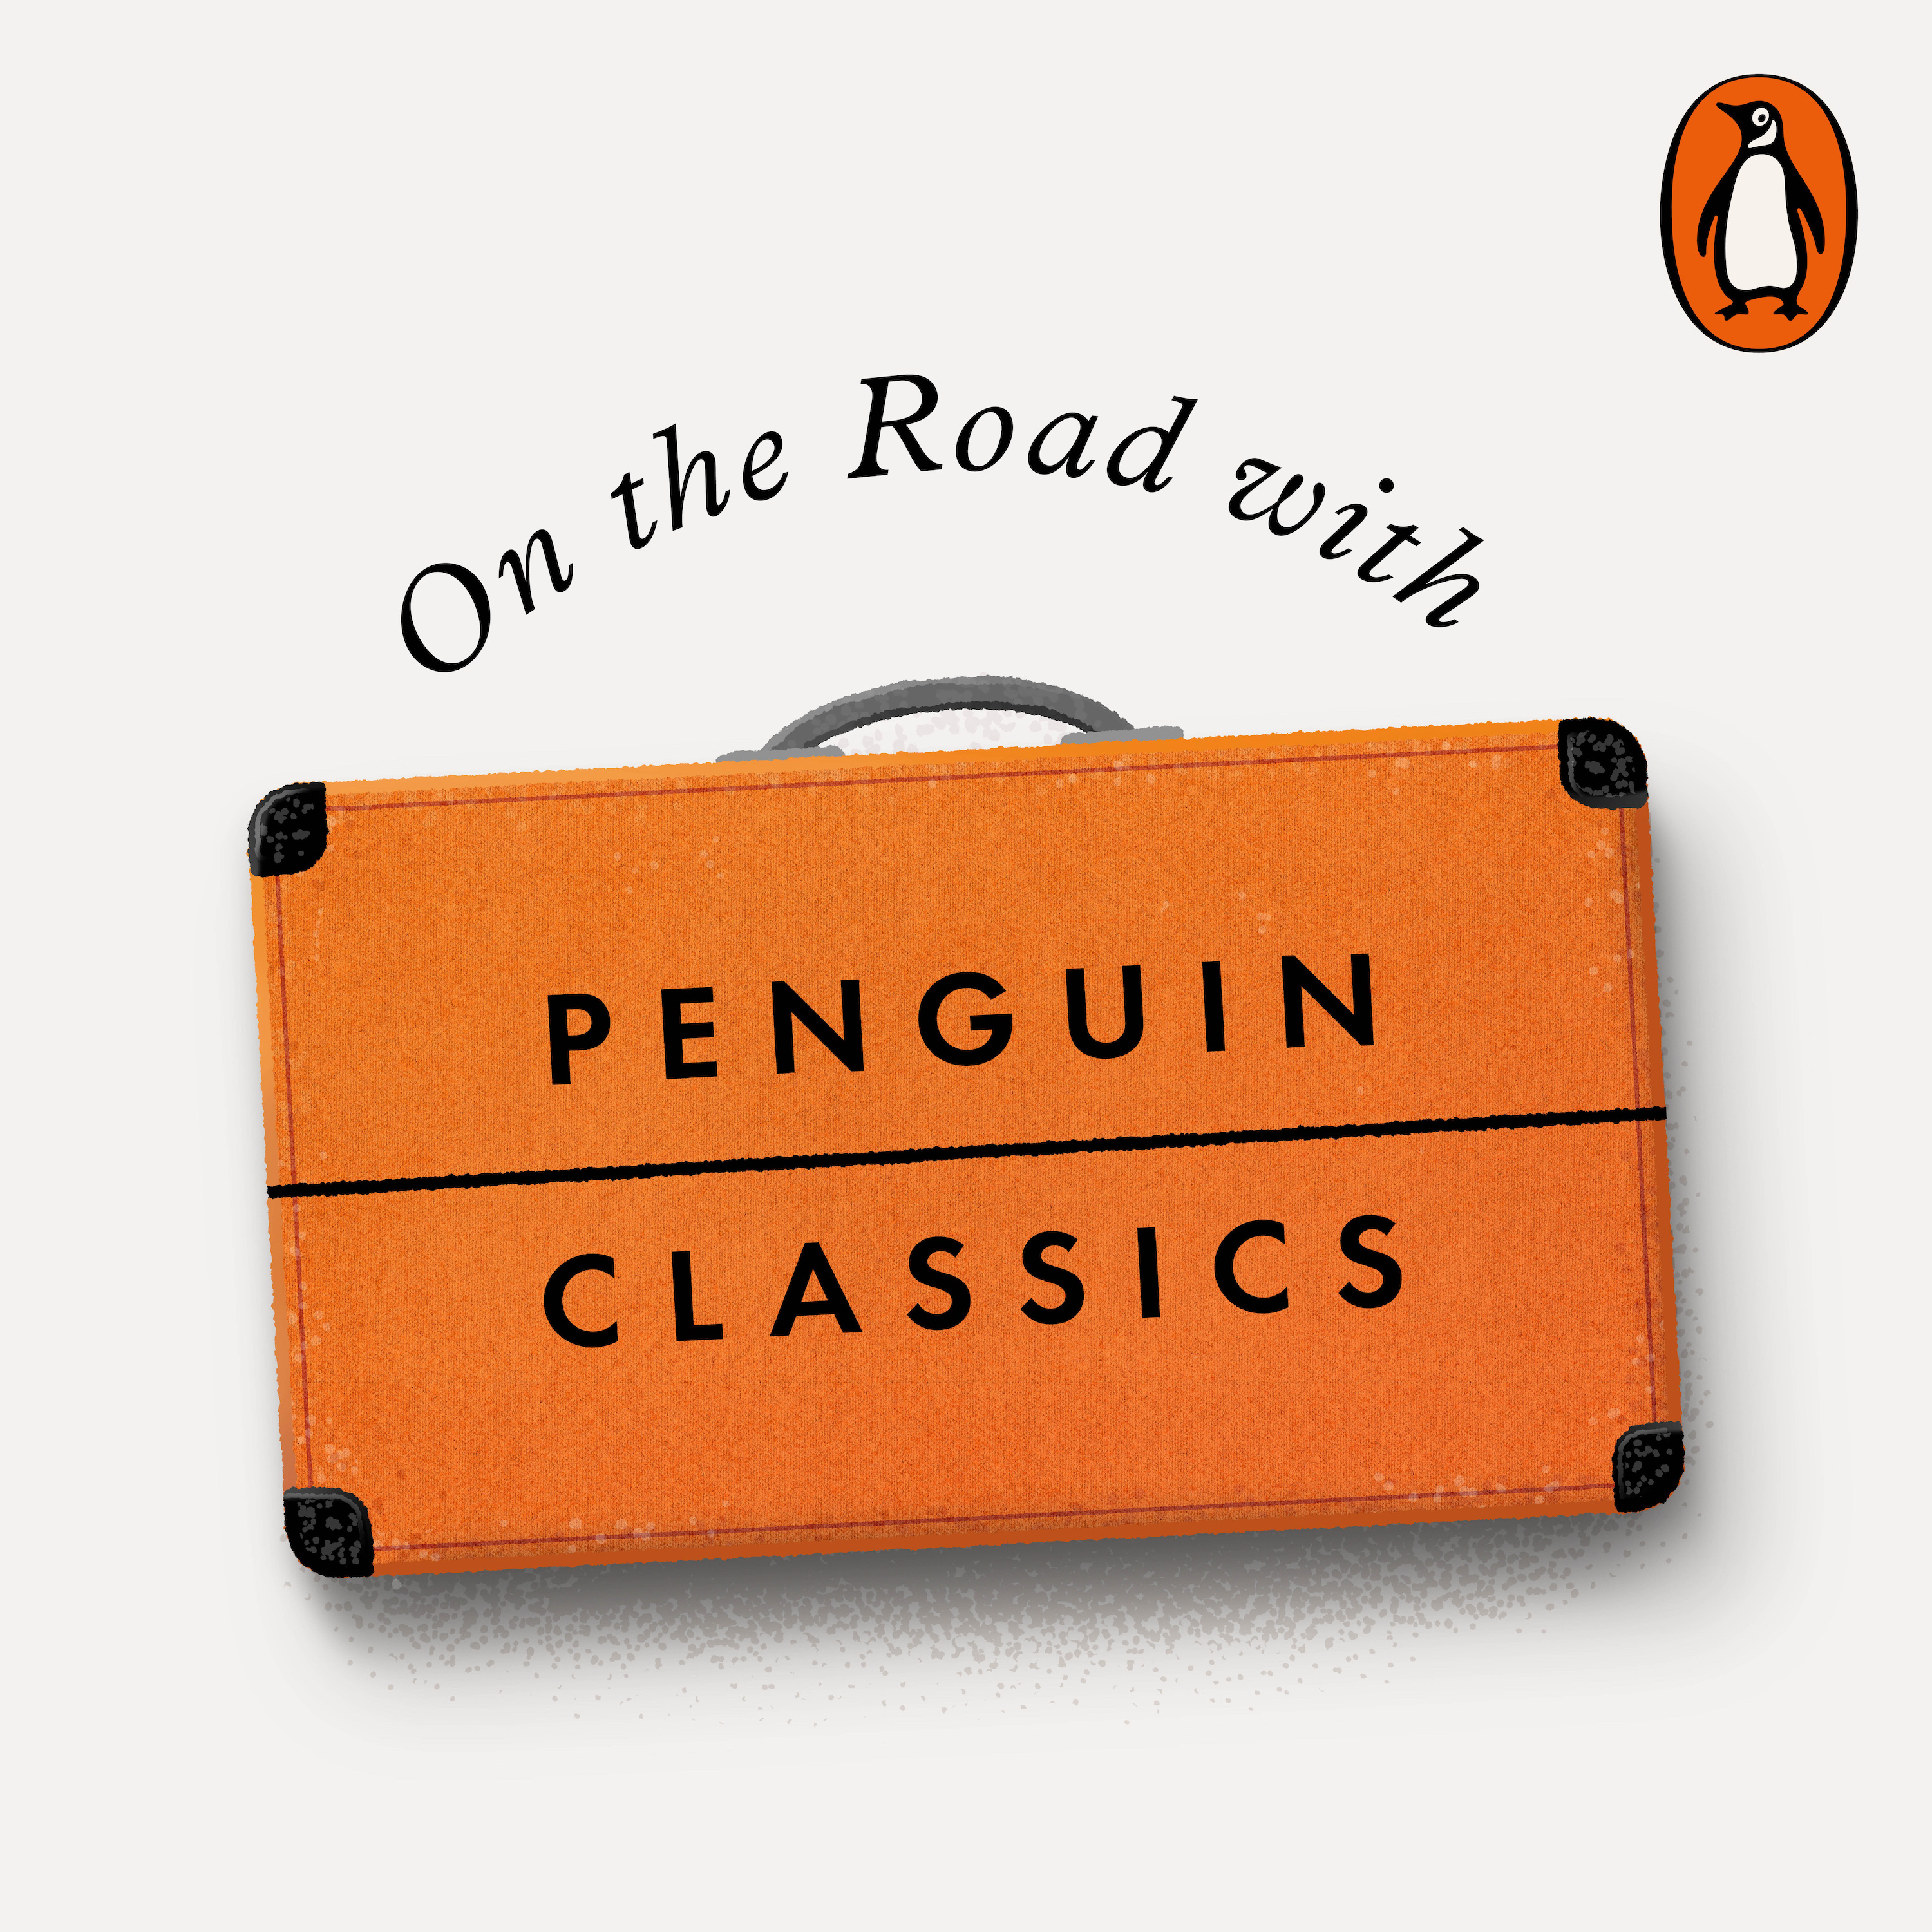 On the Road with Penguin Classics podcast logo.